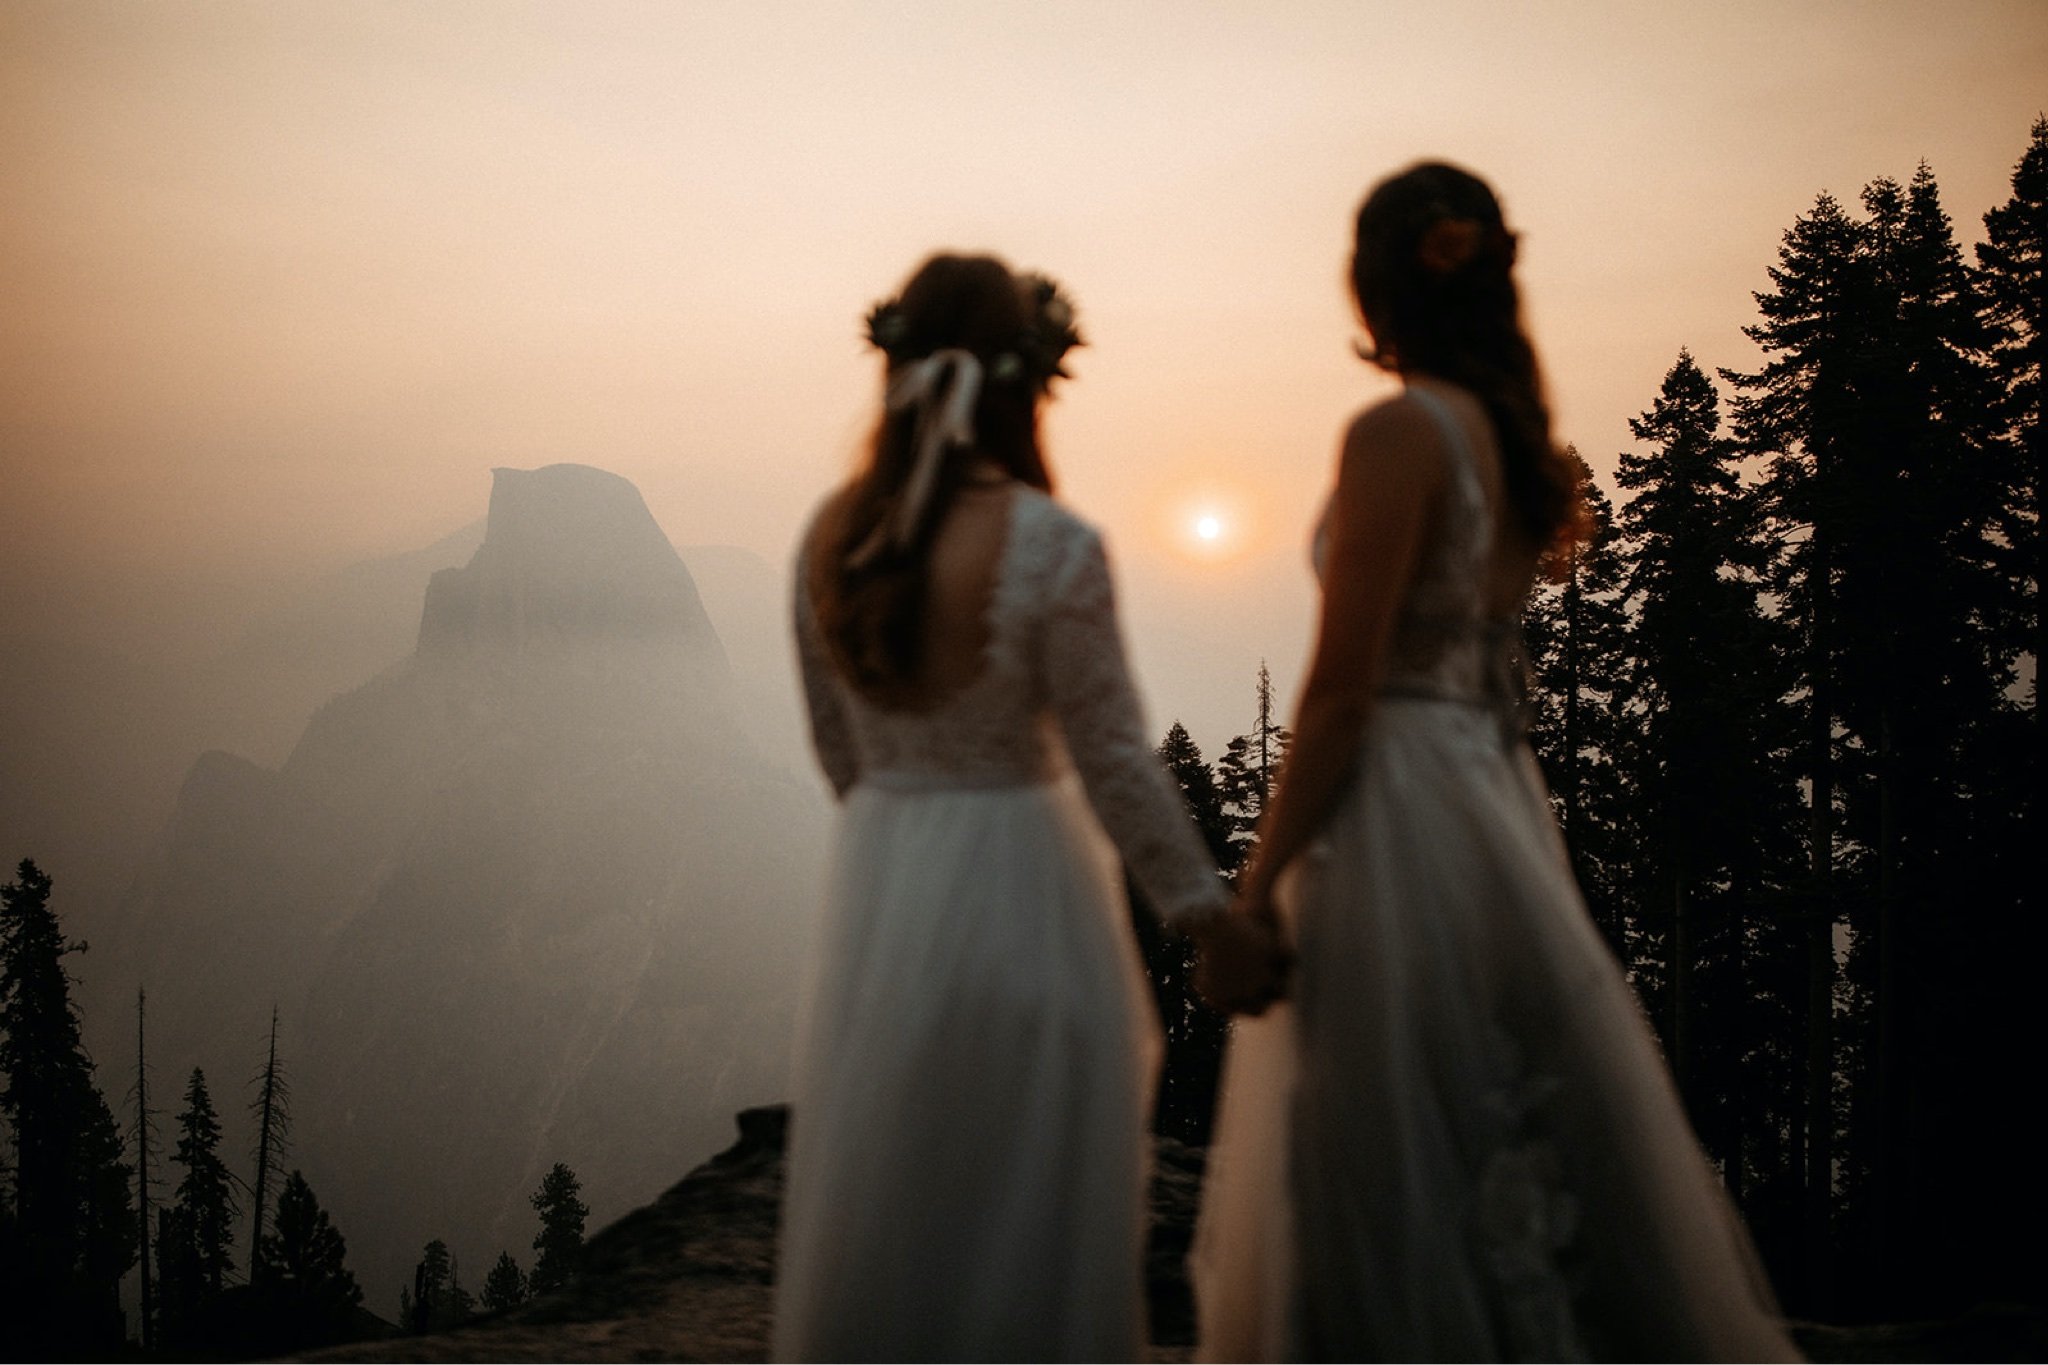 Yosemite National Park Elopement with Two Brides-Will Khoury74.jpg